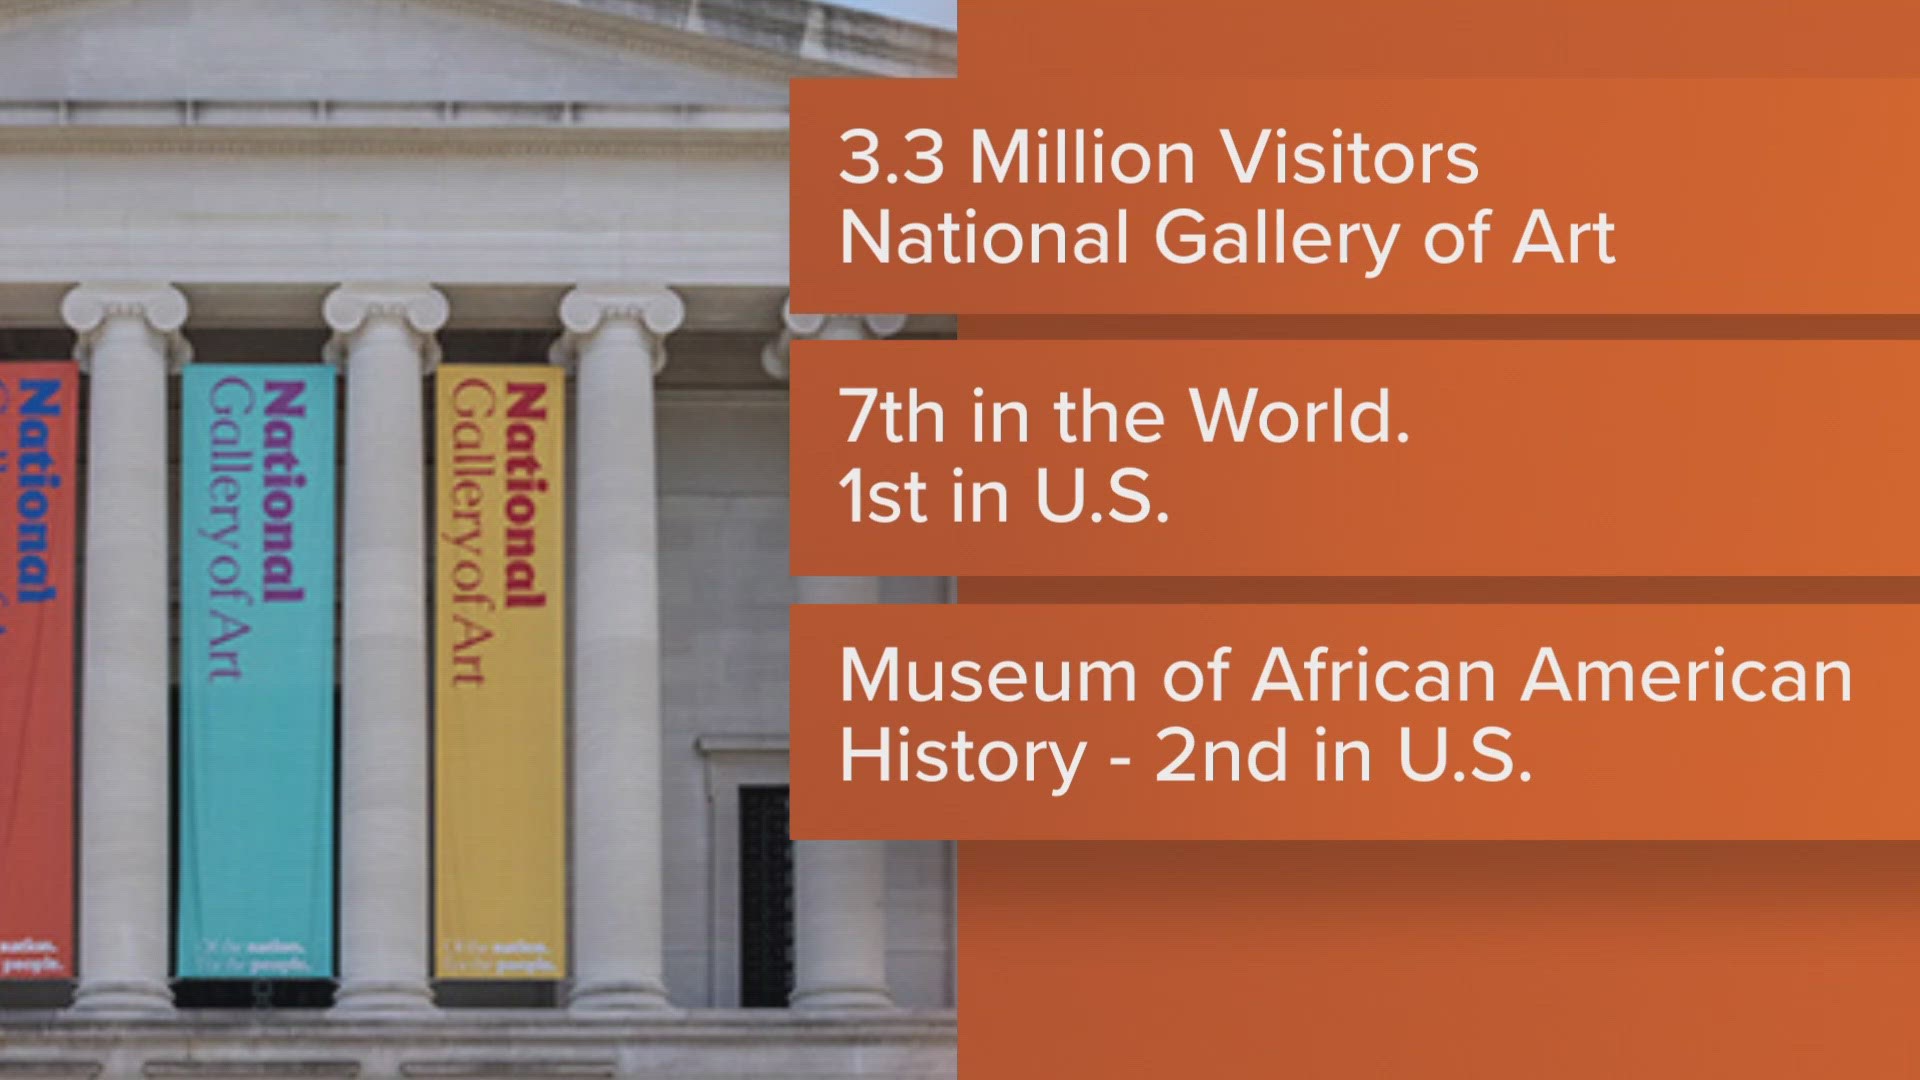 The National Gallery of Art in Washington, D.C. was the most popular art museum in the United States in 2022, according to a study.